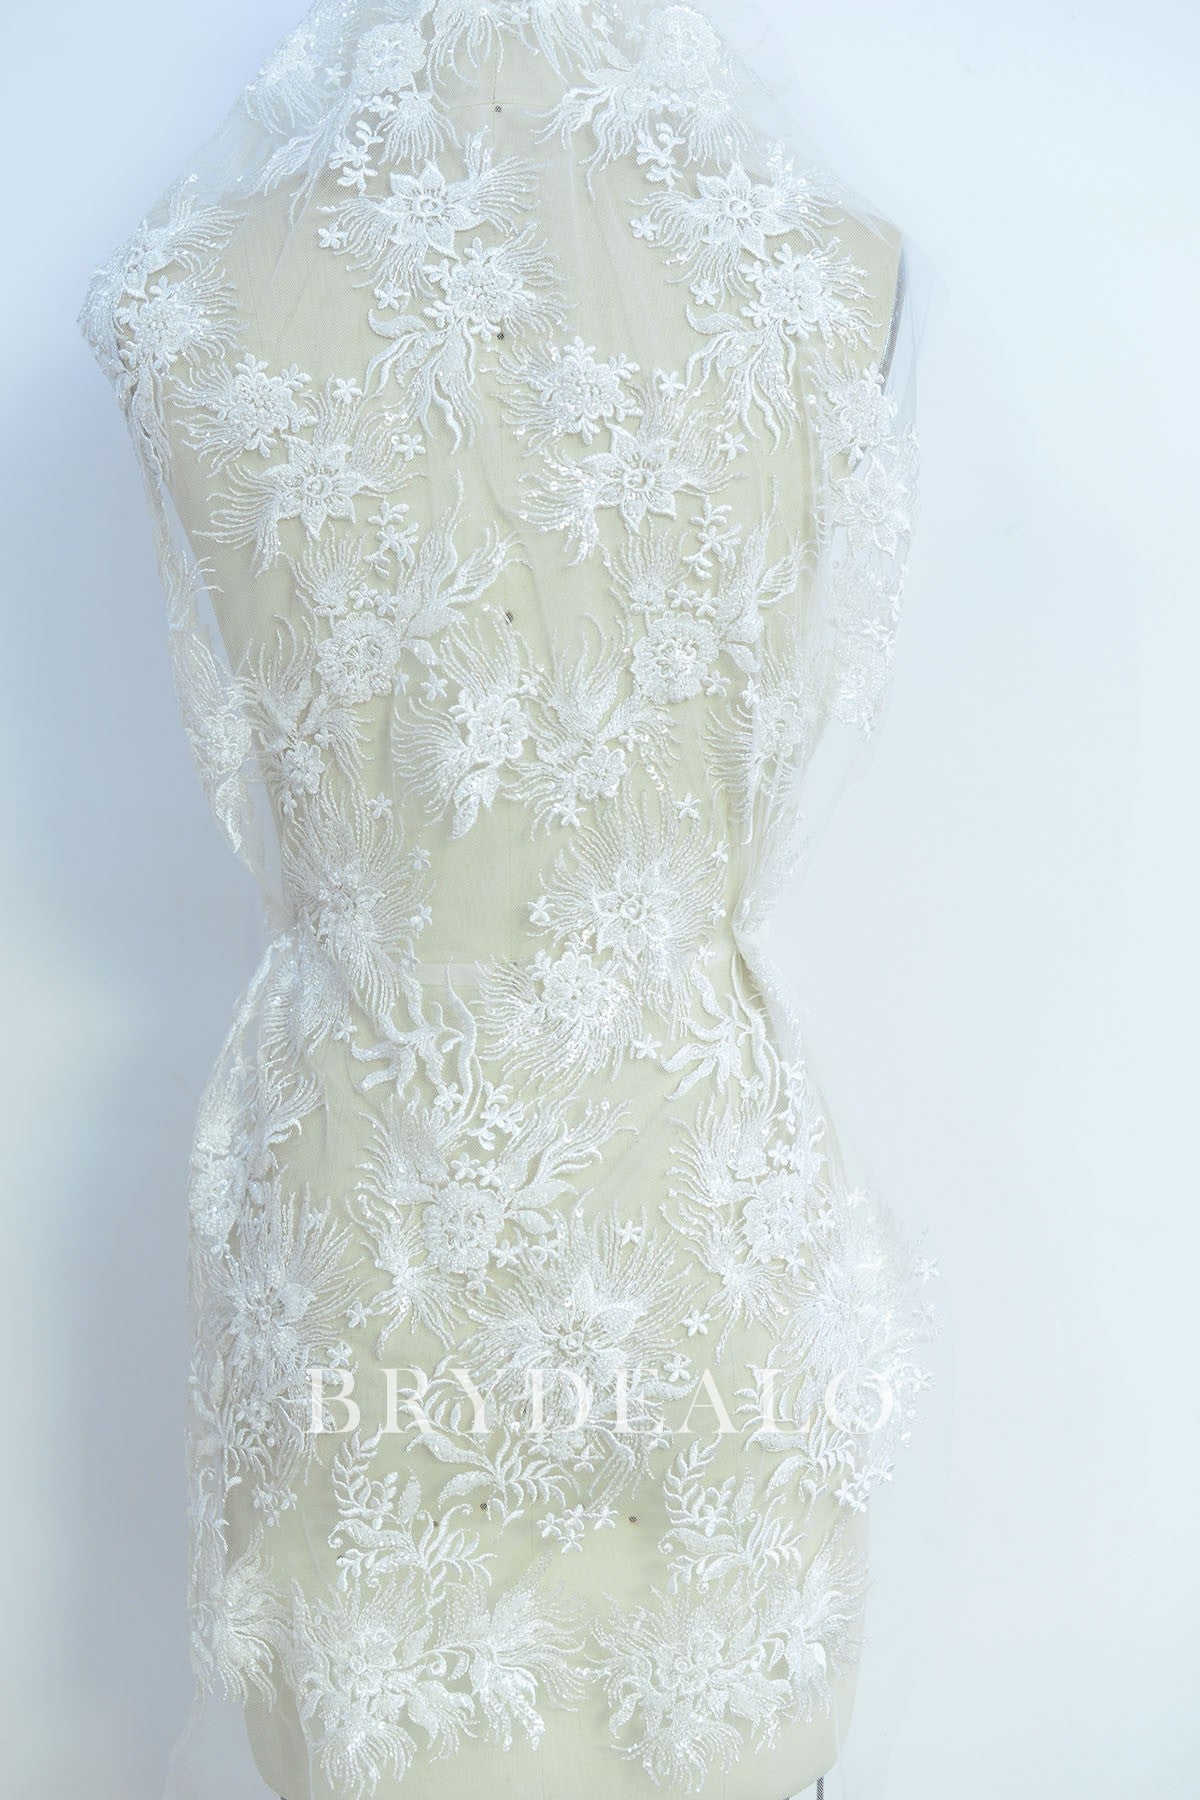 Beaded Flower Apparel Lace Fabric for wedding dresses